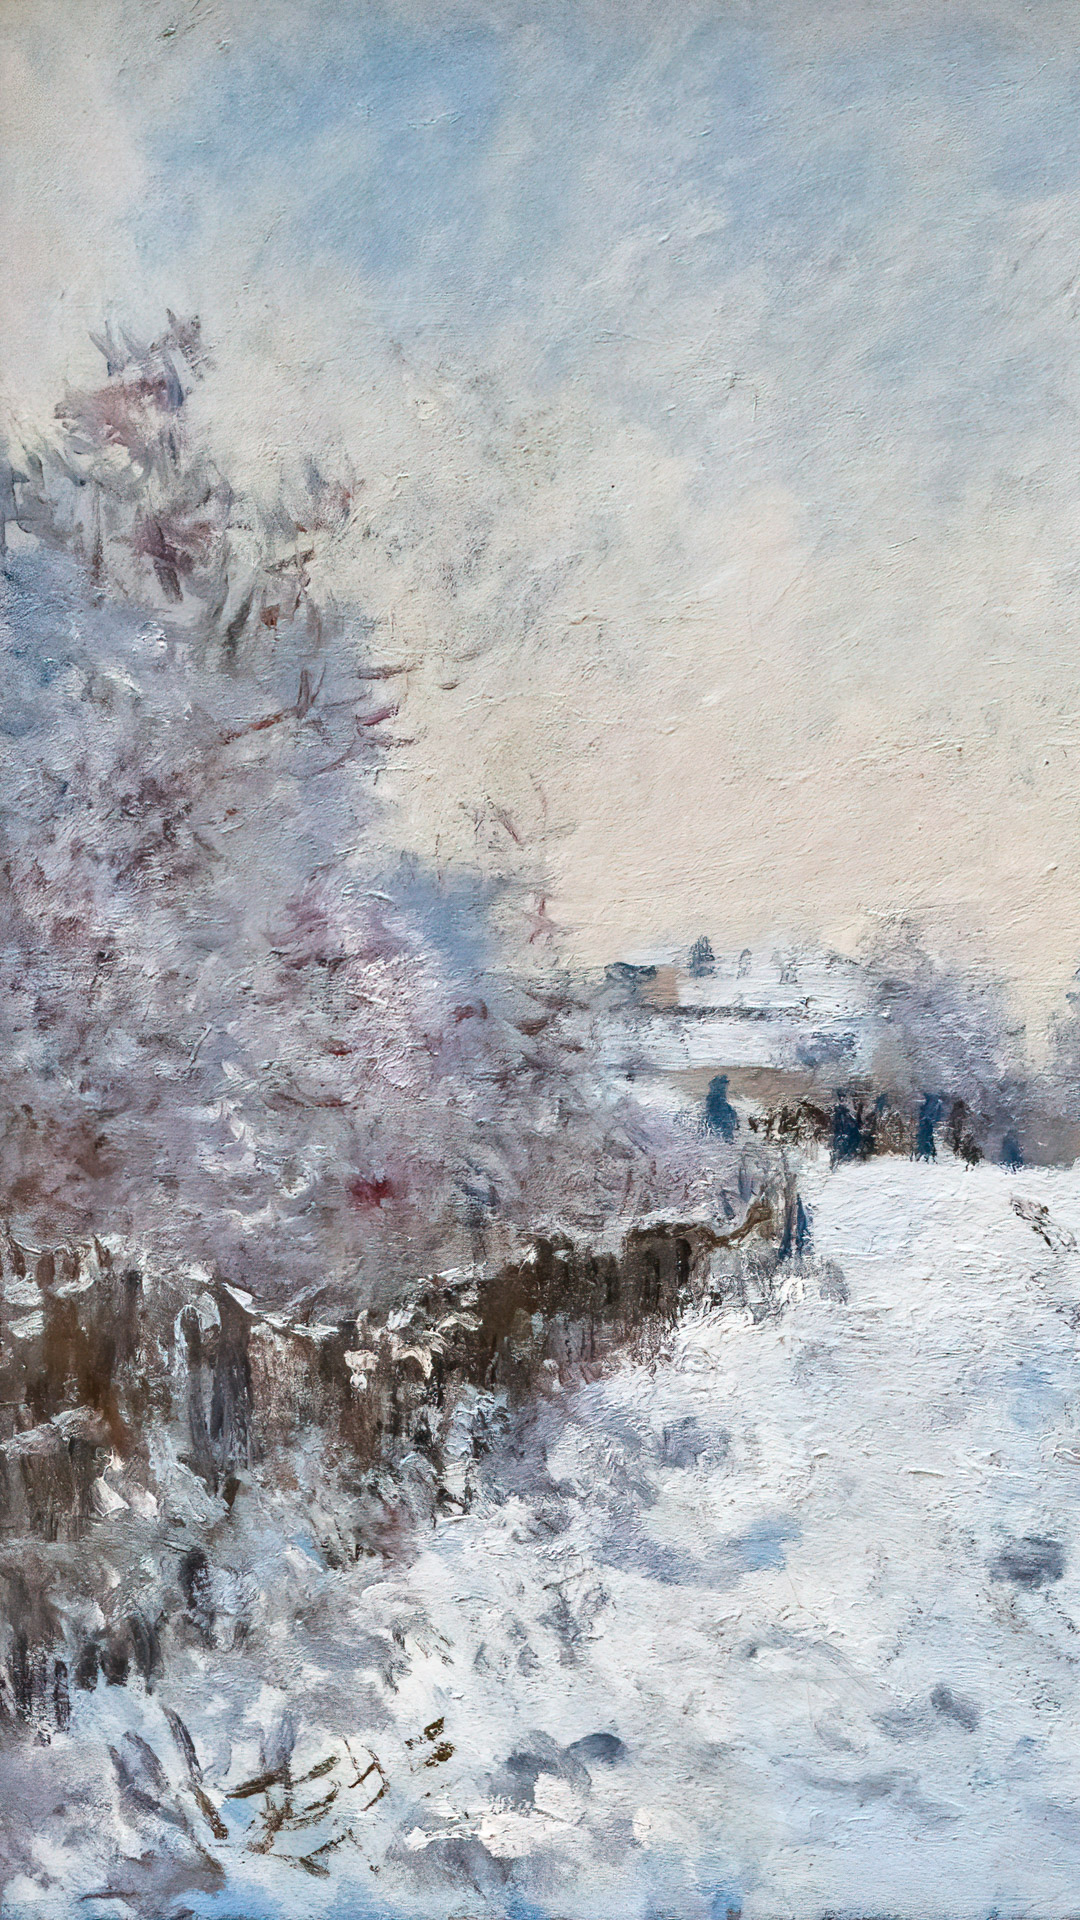 Enjoy the beauty and tranquility of winter with ‘Snow at Argenteuil’ iPhone wallpaper, featuring the serene and snowy view of the French town that Monet painted in 1875.